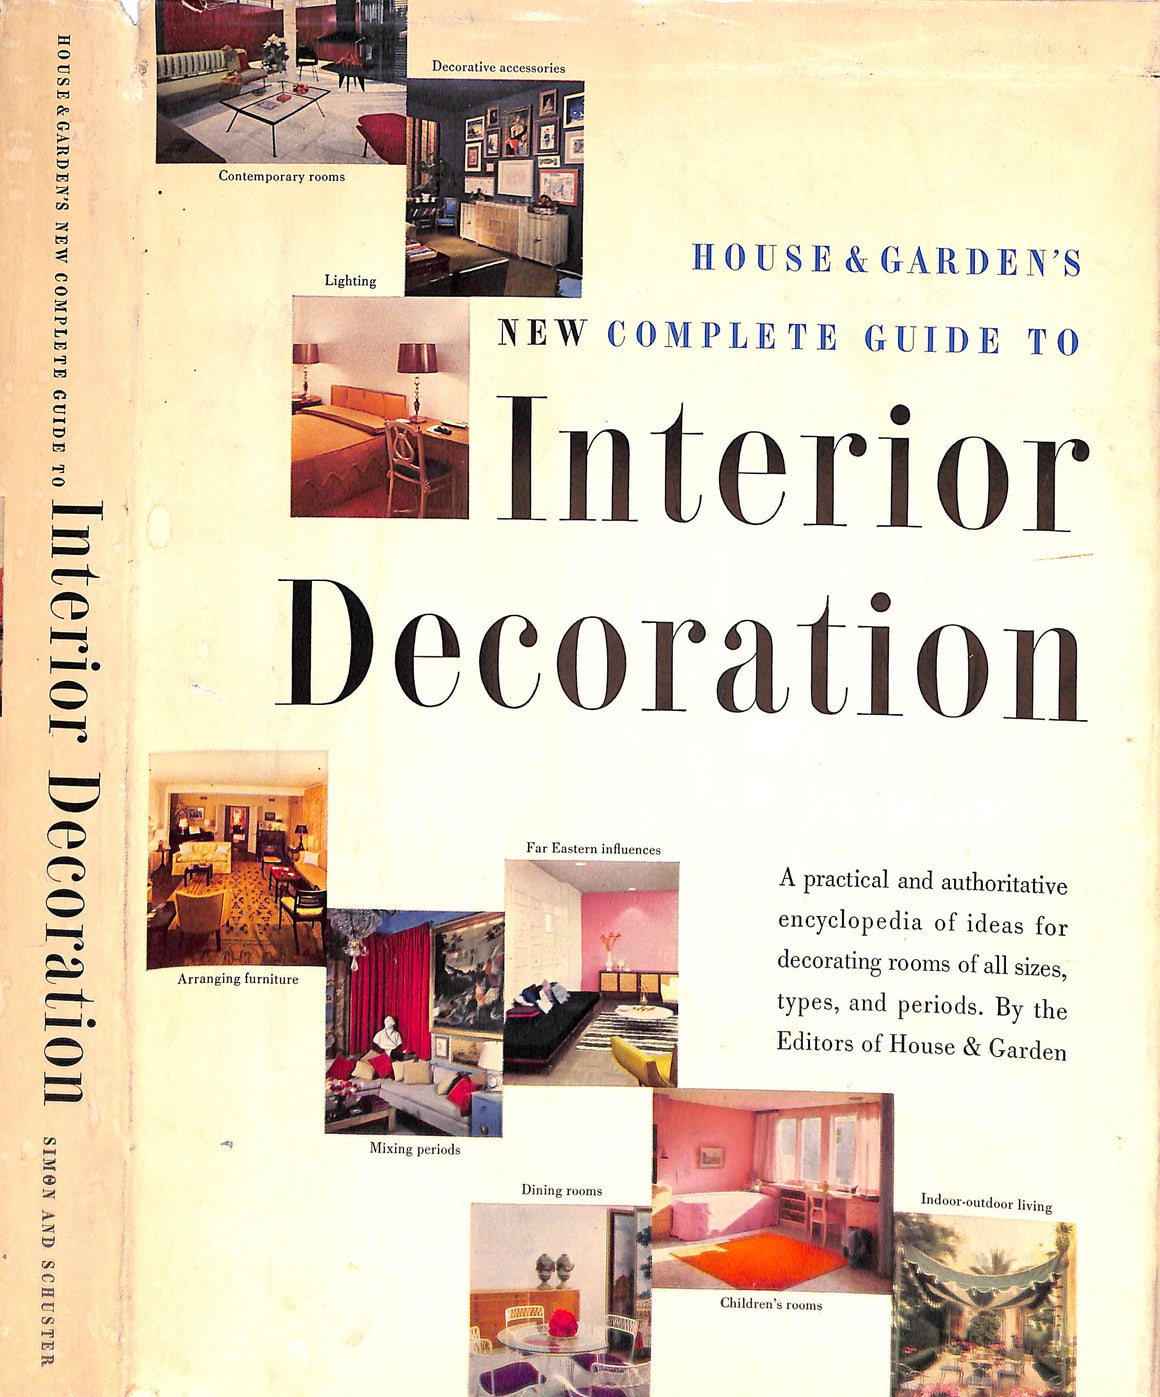 "House & Garden's New Complete Guide To Interior Decoration" 1953